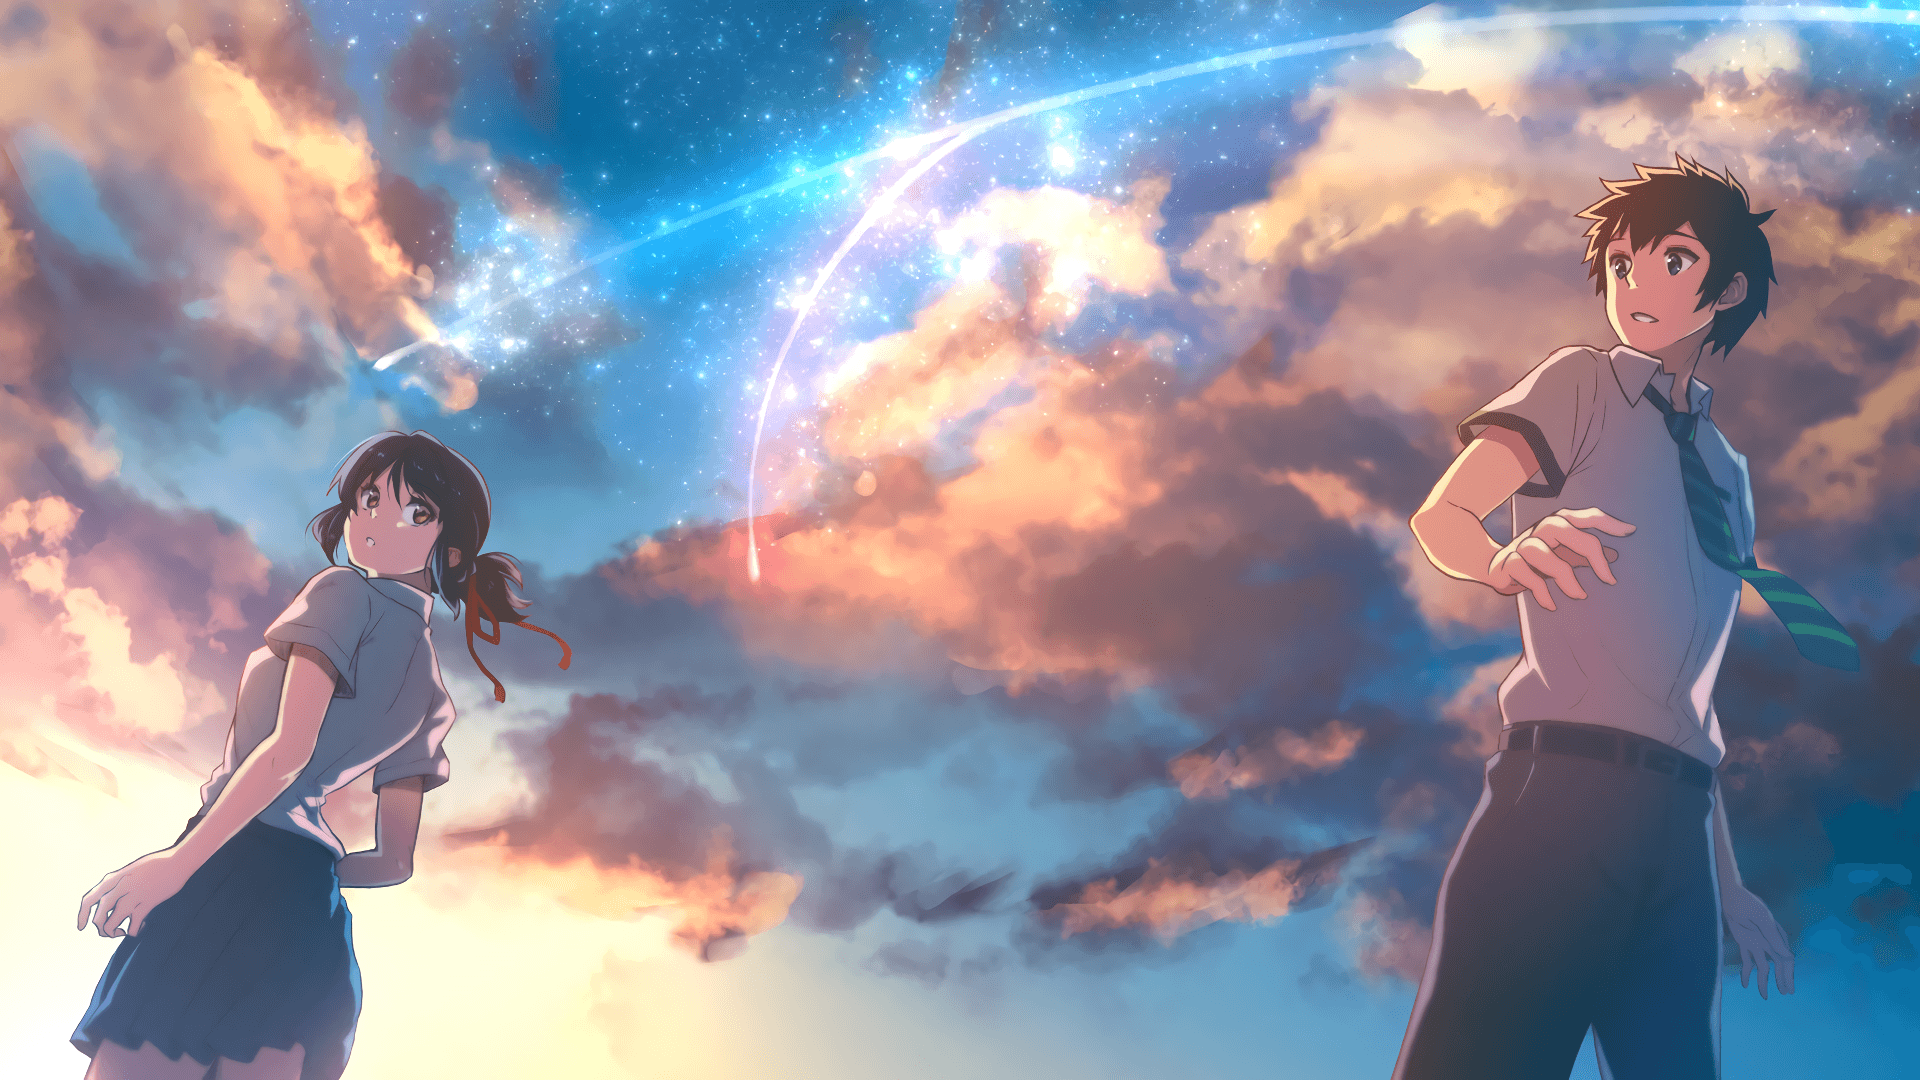 824 Your Name. HD Wallpapers